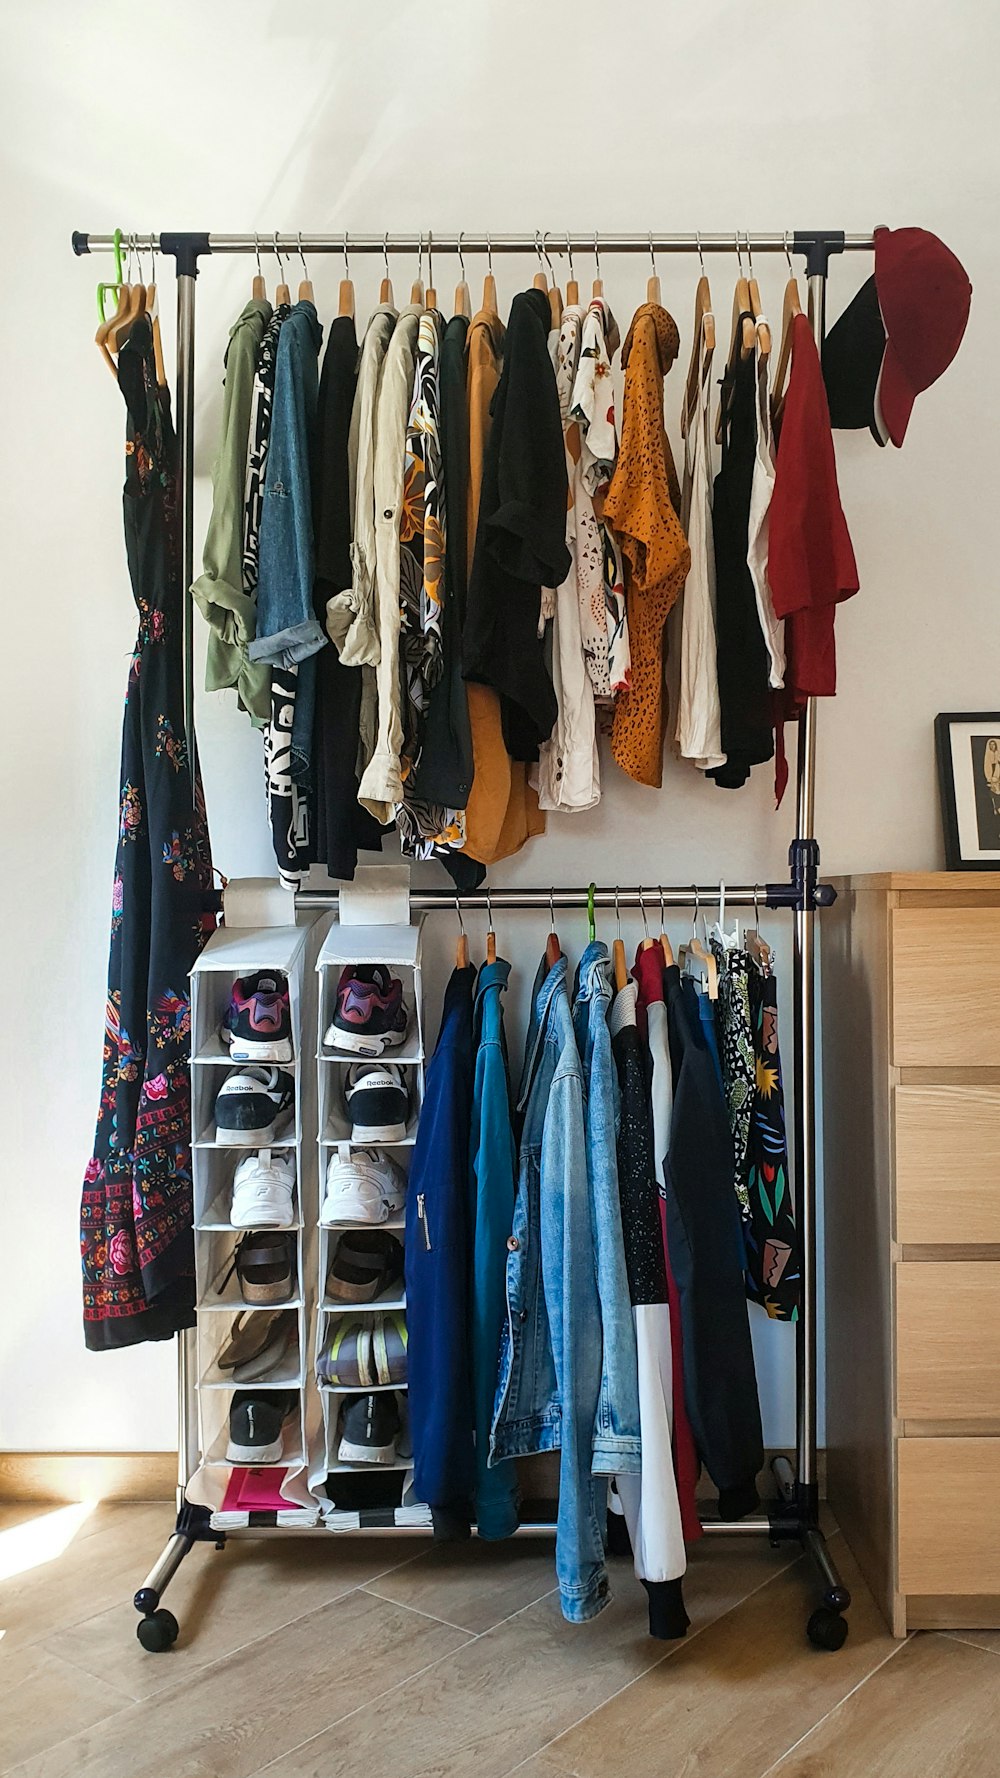 clothes hanged on brown wooden cabinet